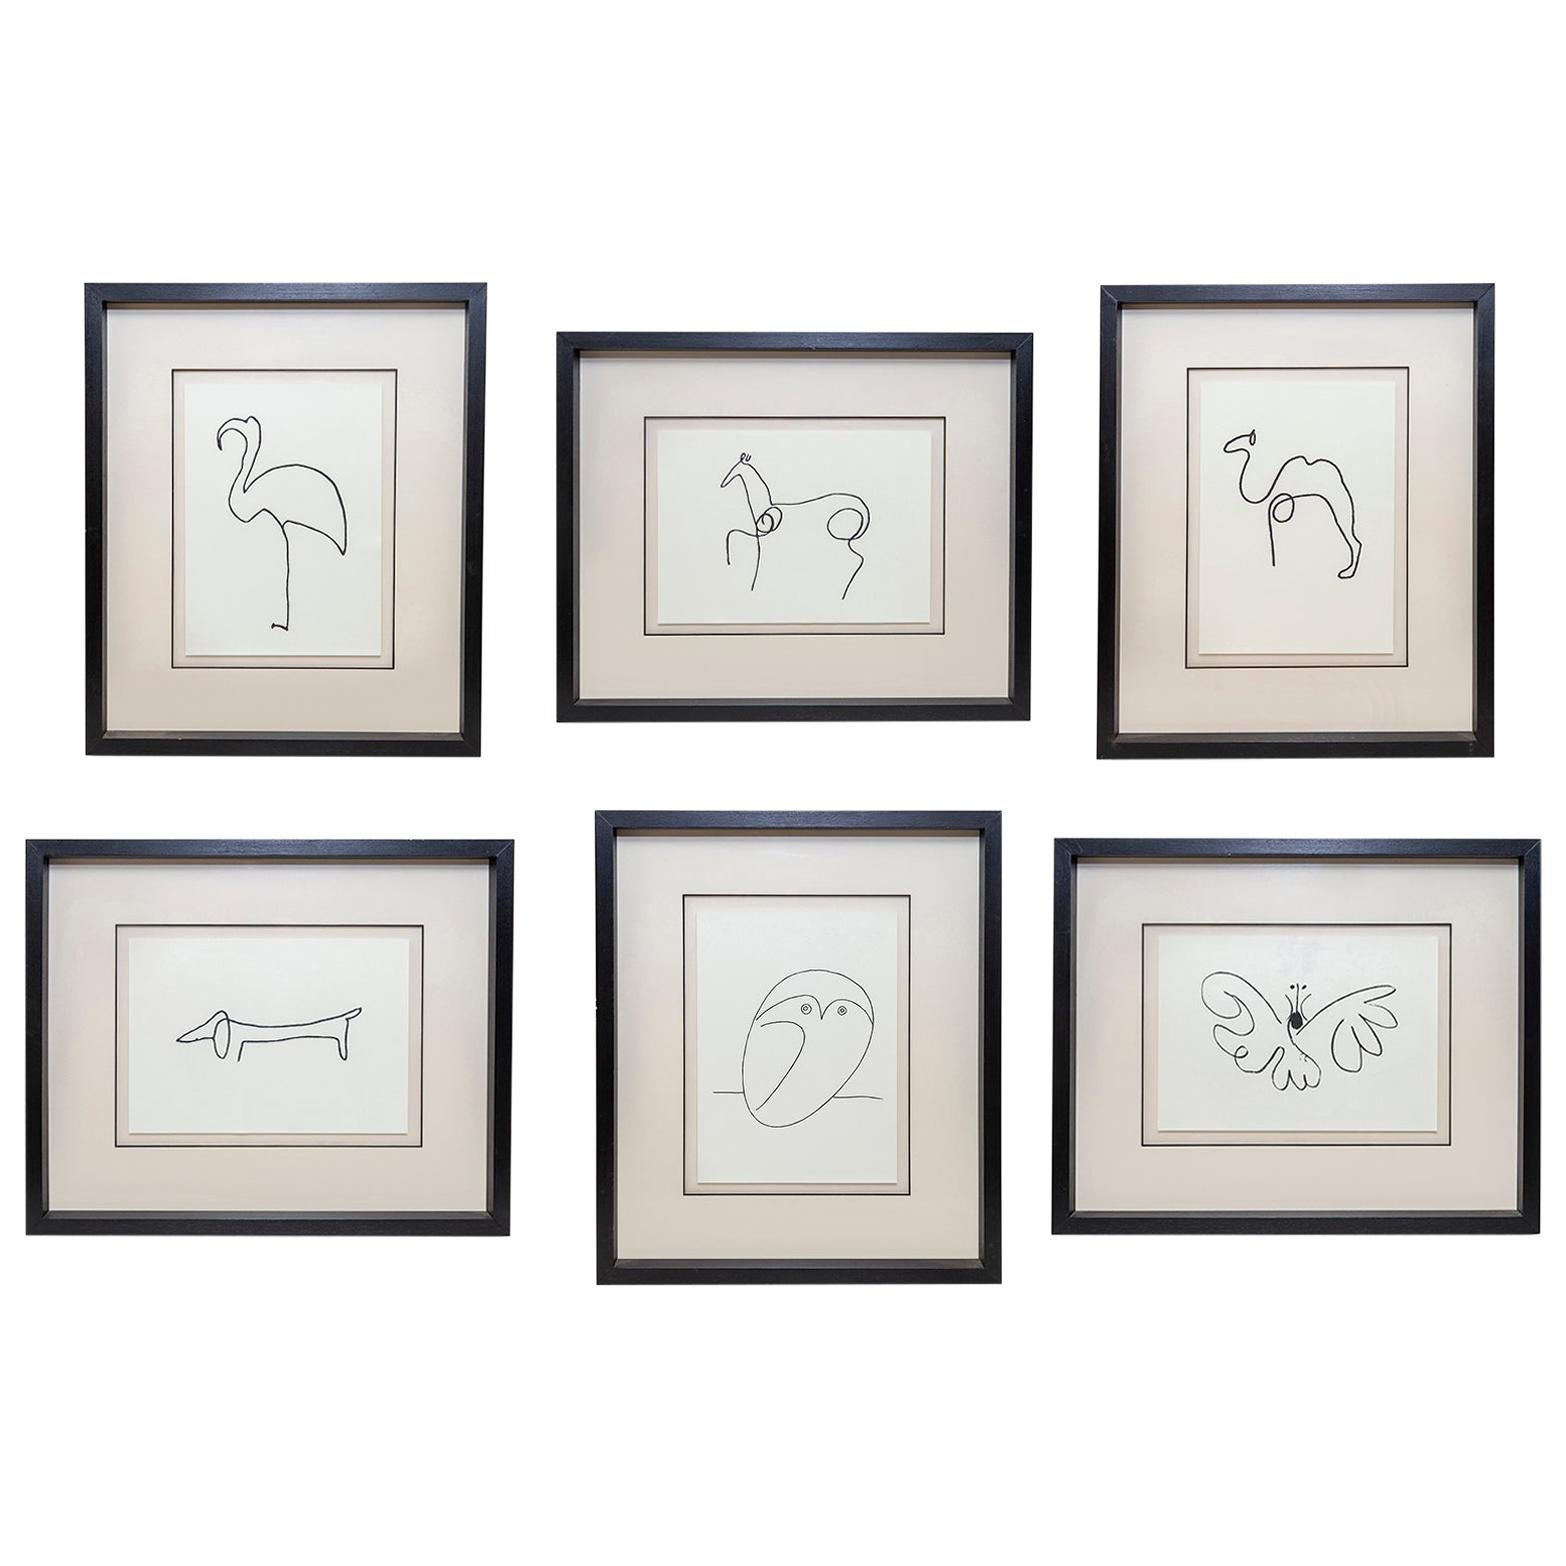 After Picasso Line Drawing Owl Set of 6 Butterfly Dog Horse Camel Flamingo Print For Sale